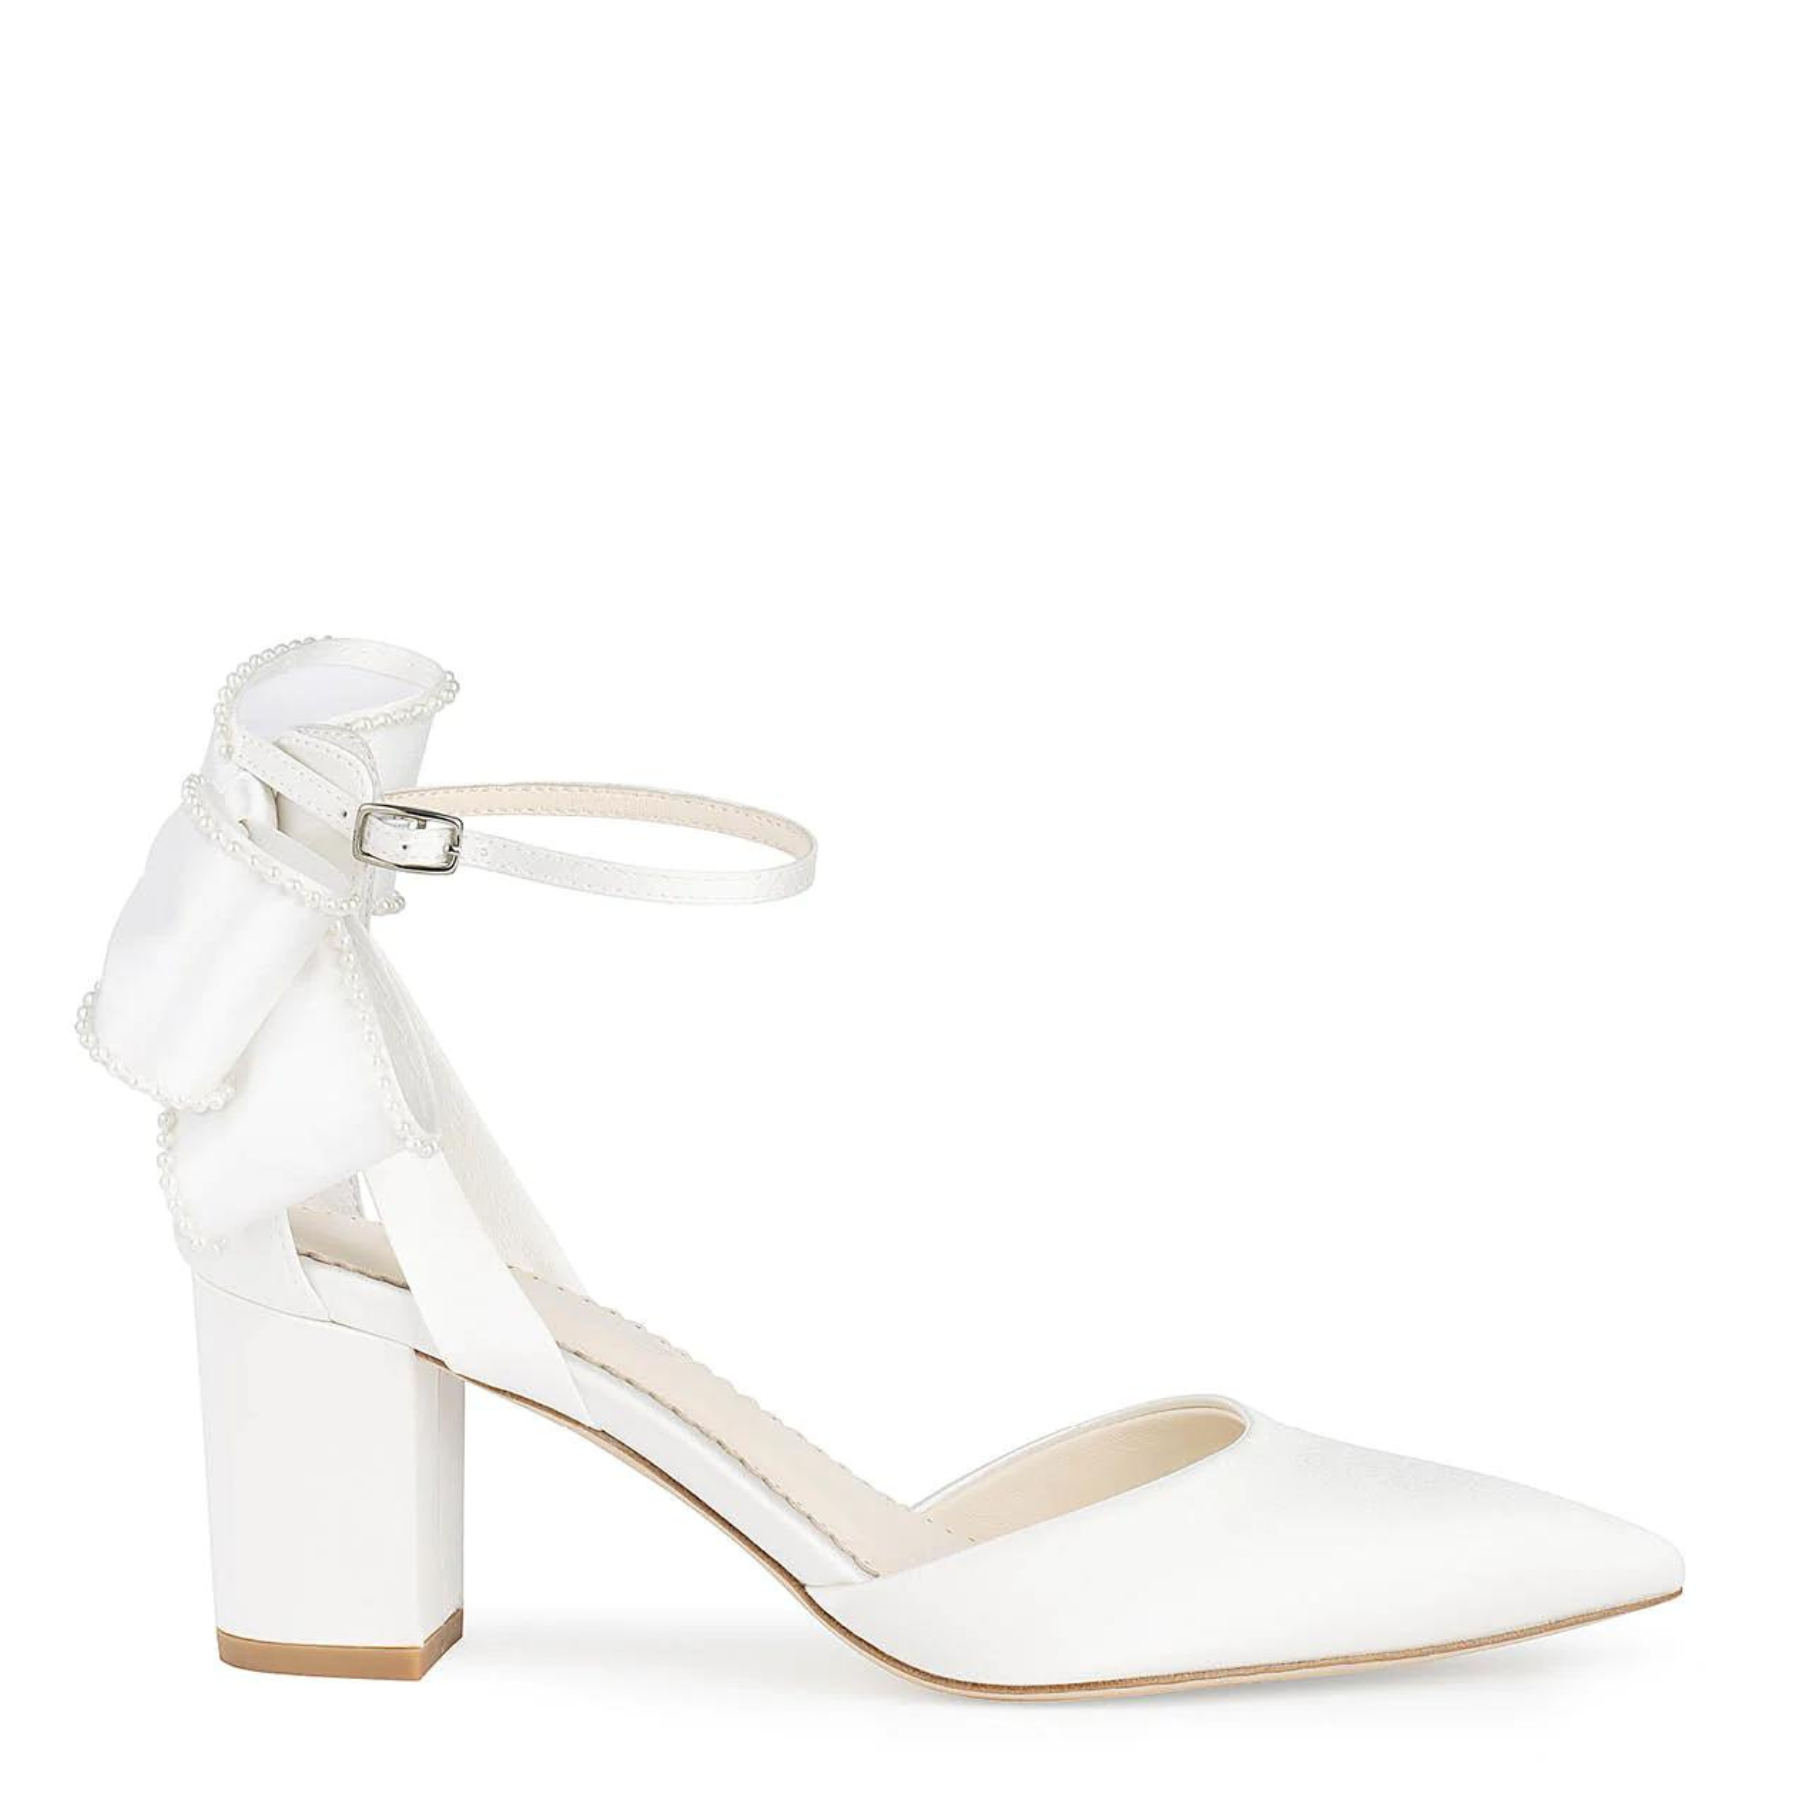 Molly - Ivory Pearl Block Wedding Heels with Ankle Strap Bow